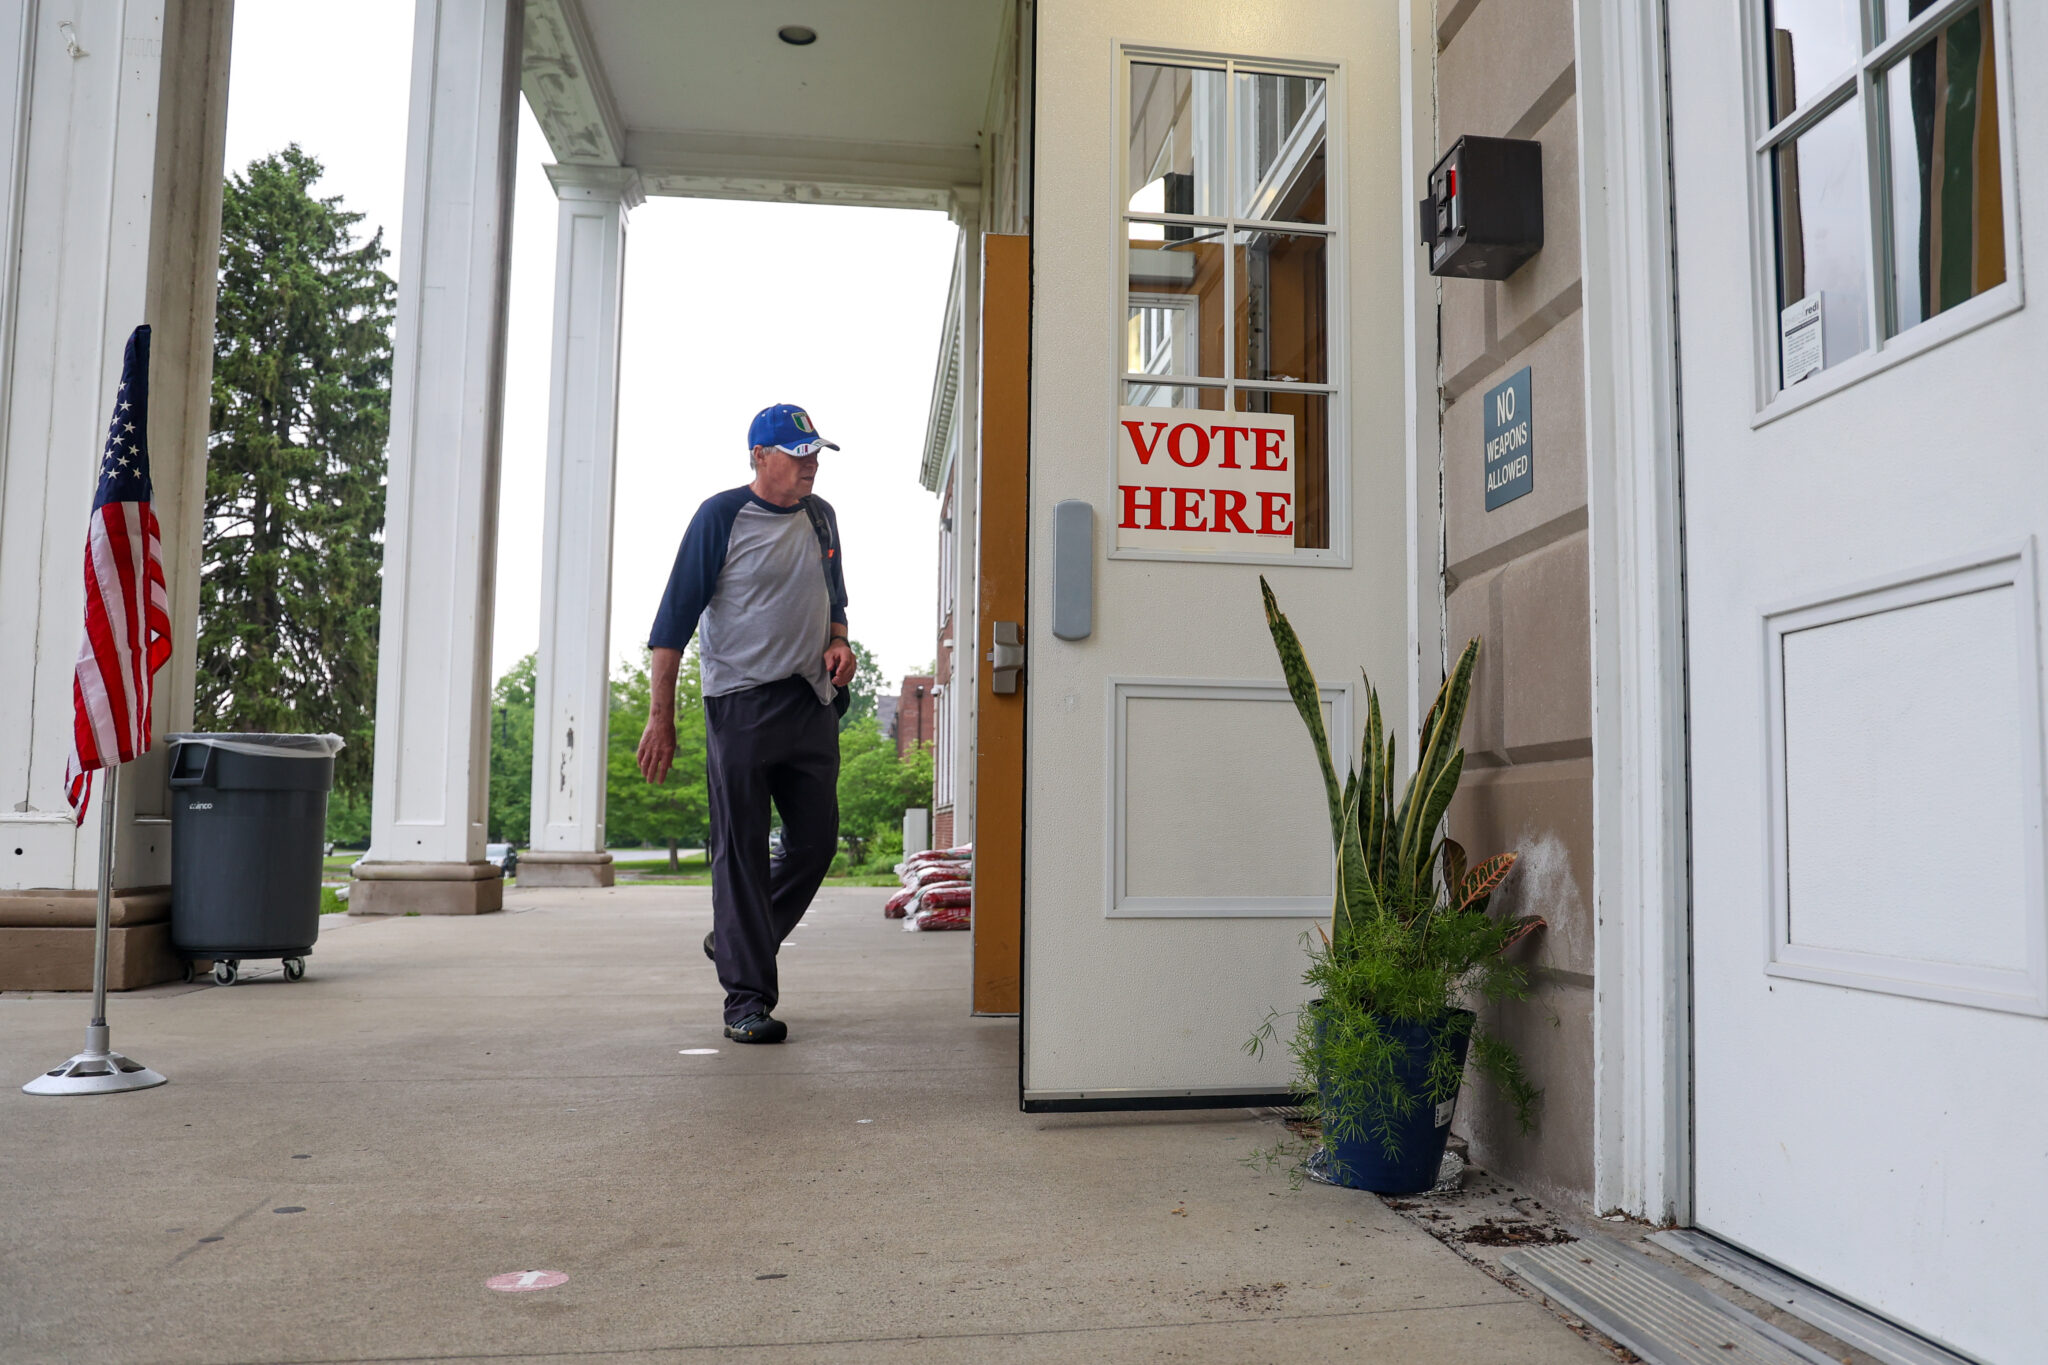 voter walking into polling place on election day